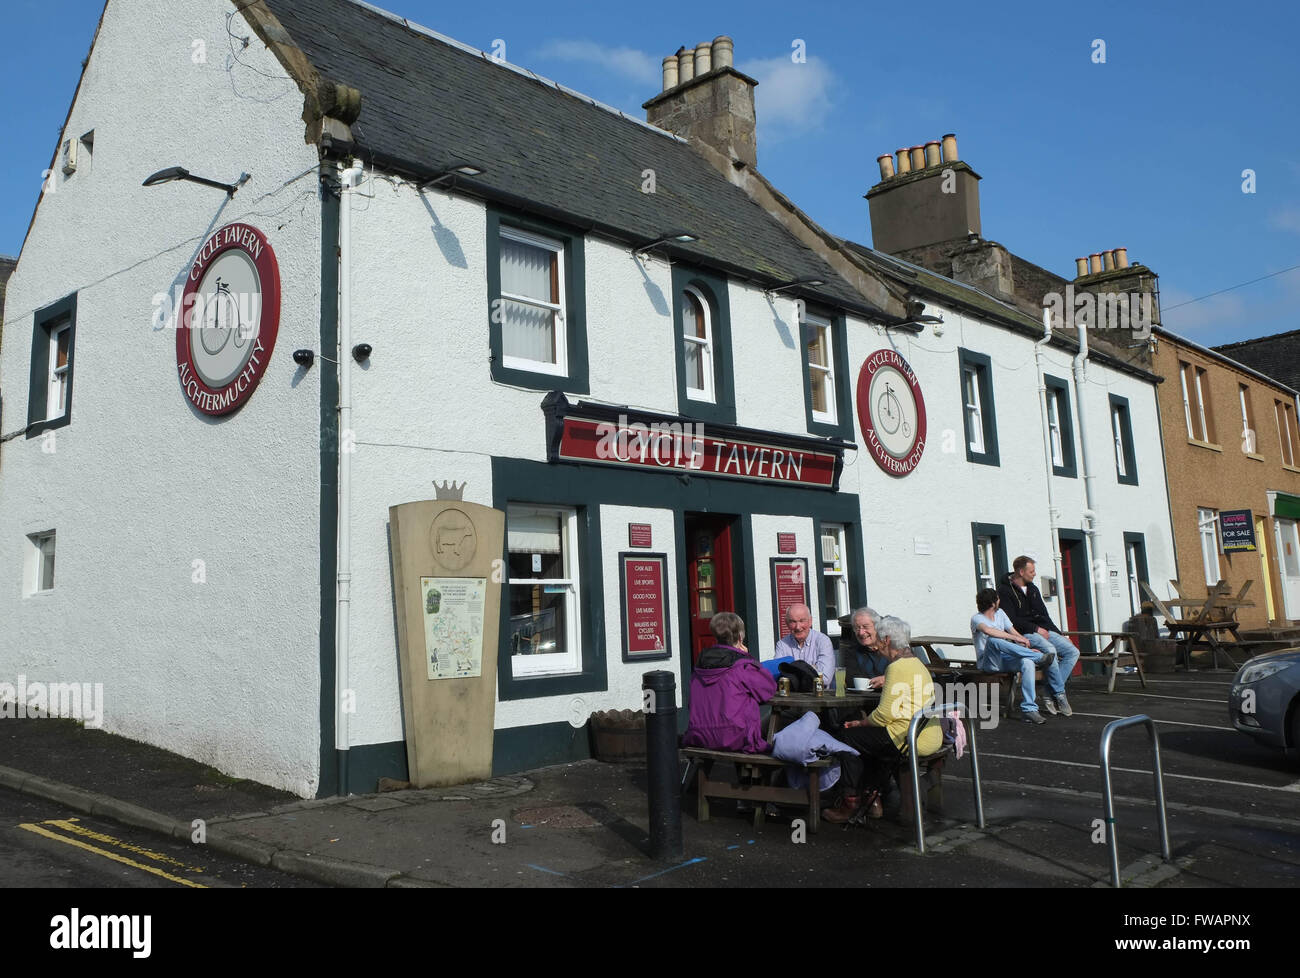 Customers enjoy a refreshment outside the Cycle Tavern in Auchtermuchty, Fife, Scotland, Stock Photo